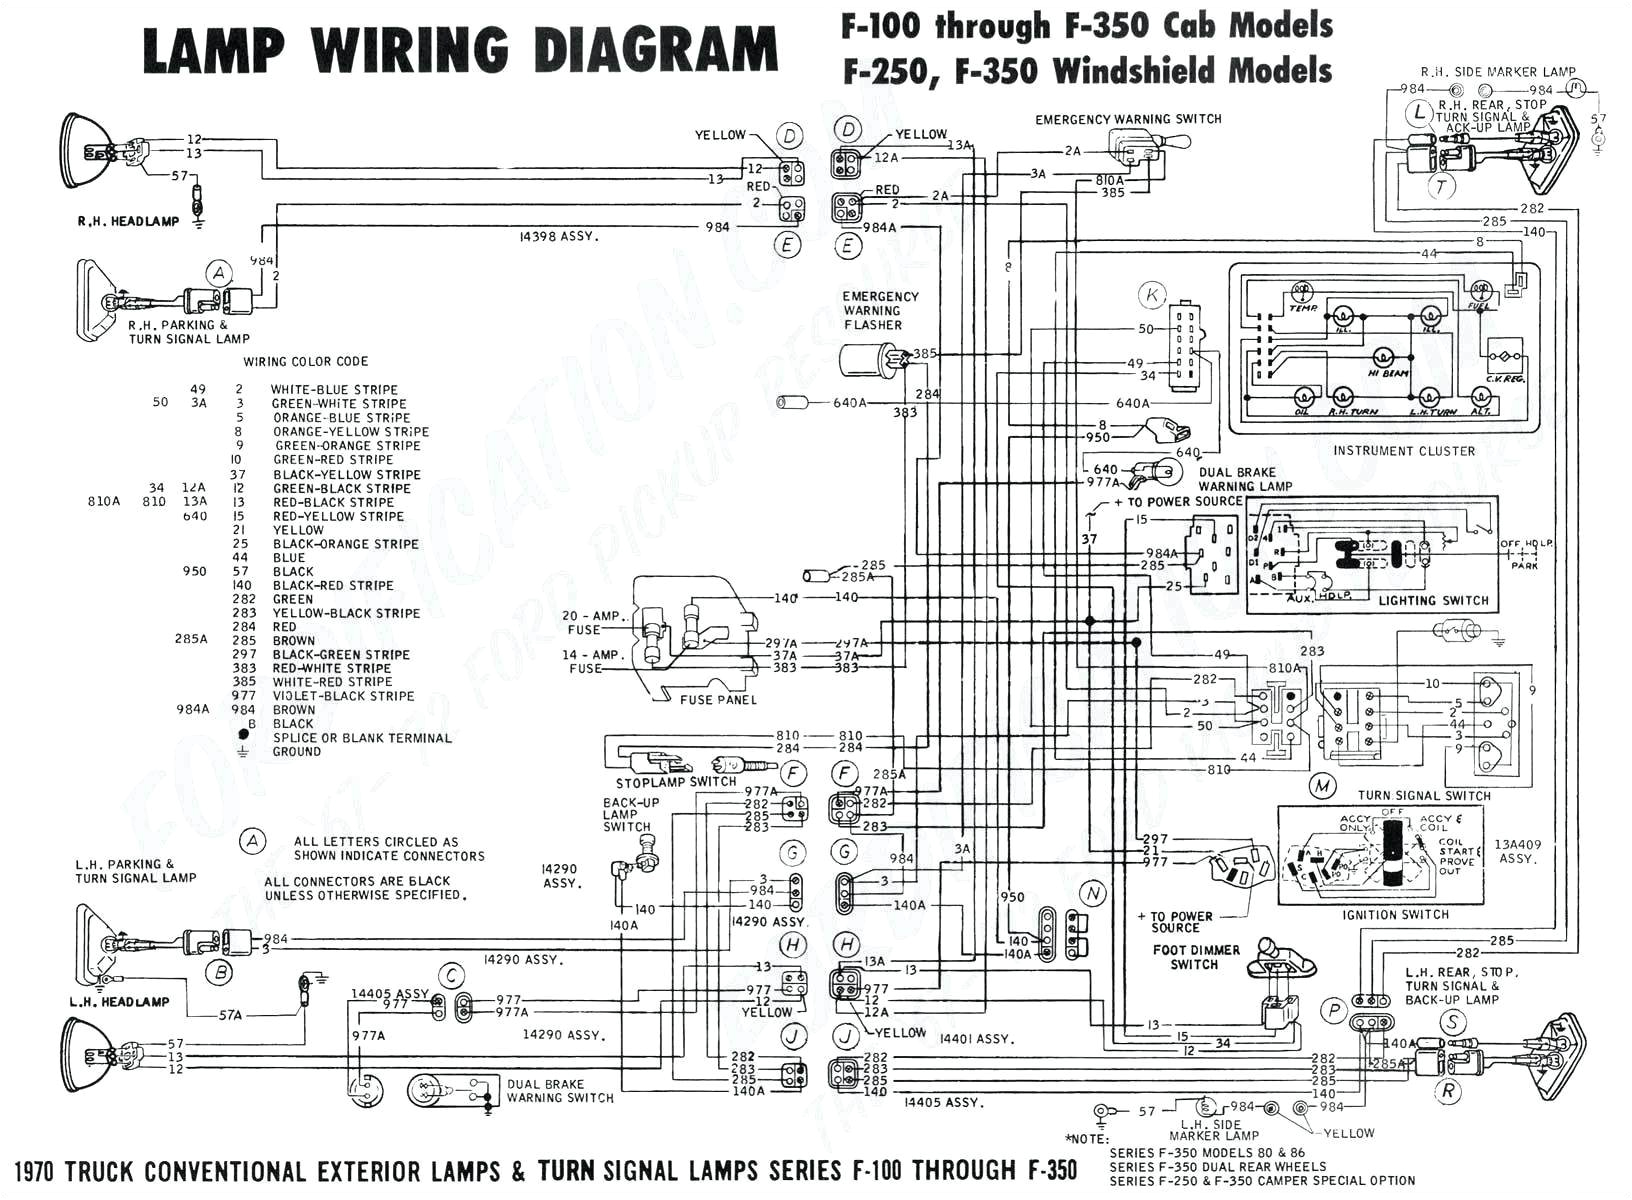 Dome Light Wiring Diagram ford Ez Dome Light Wiring Harness Diagram Wiring Diagram Post